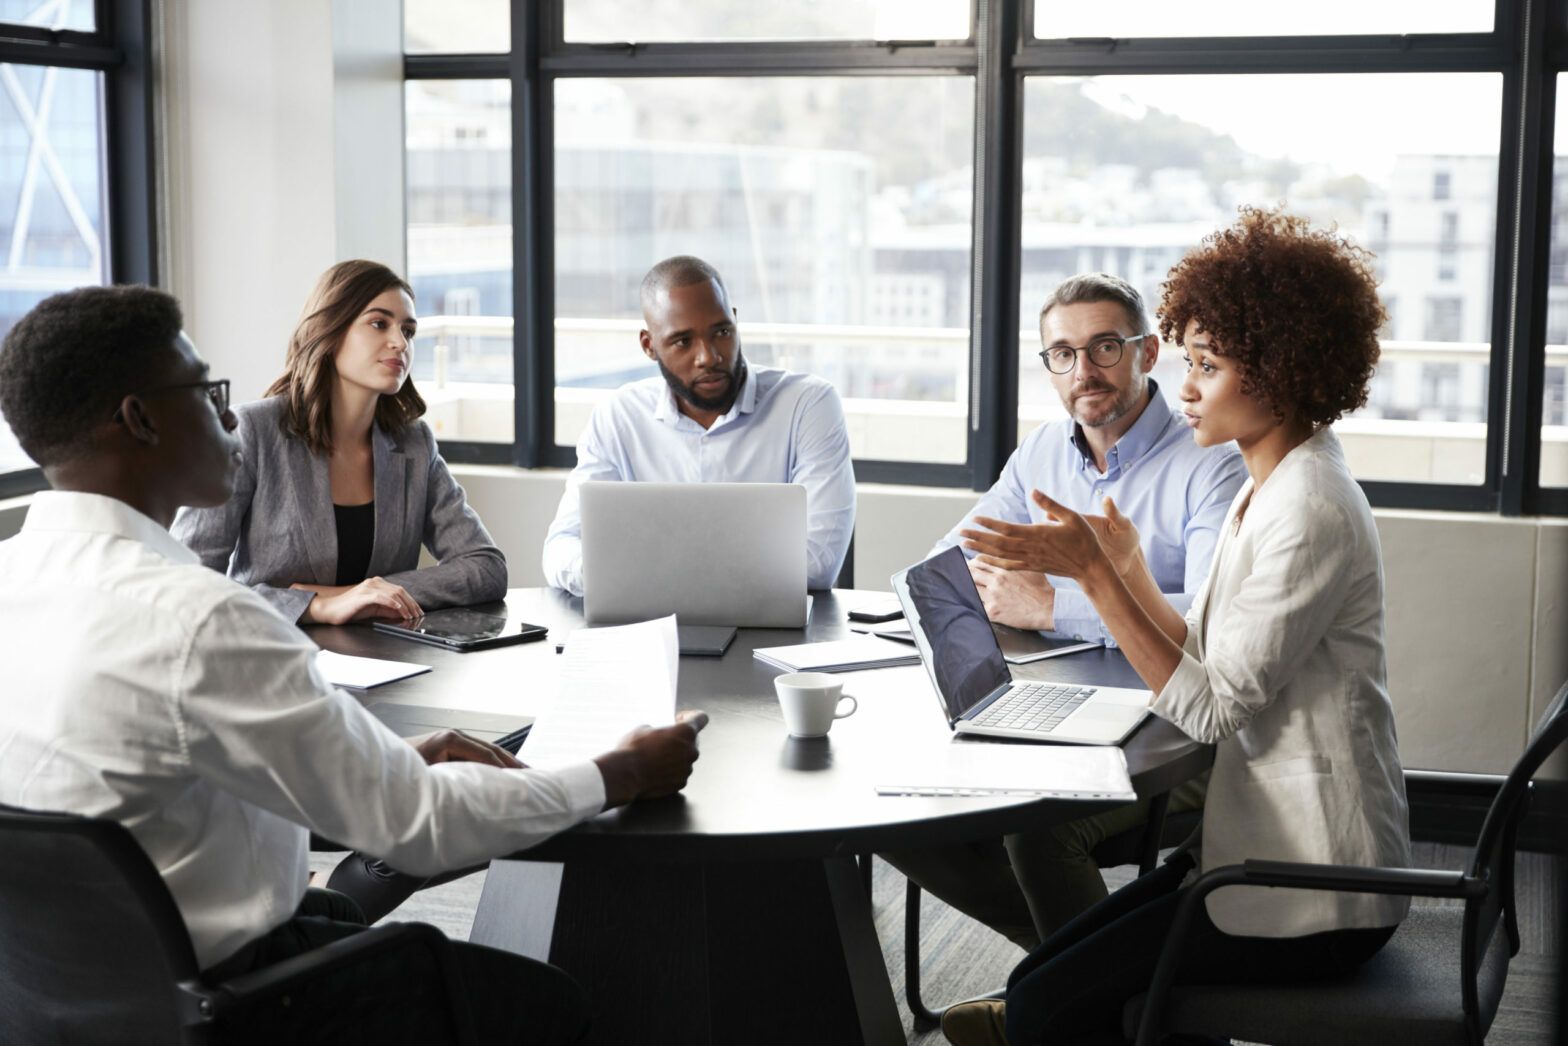 Ethnically diverse boards perform better